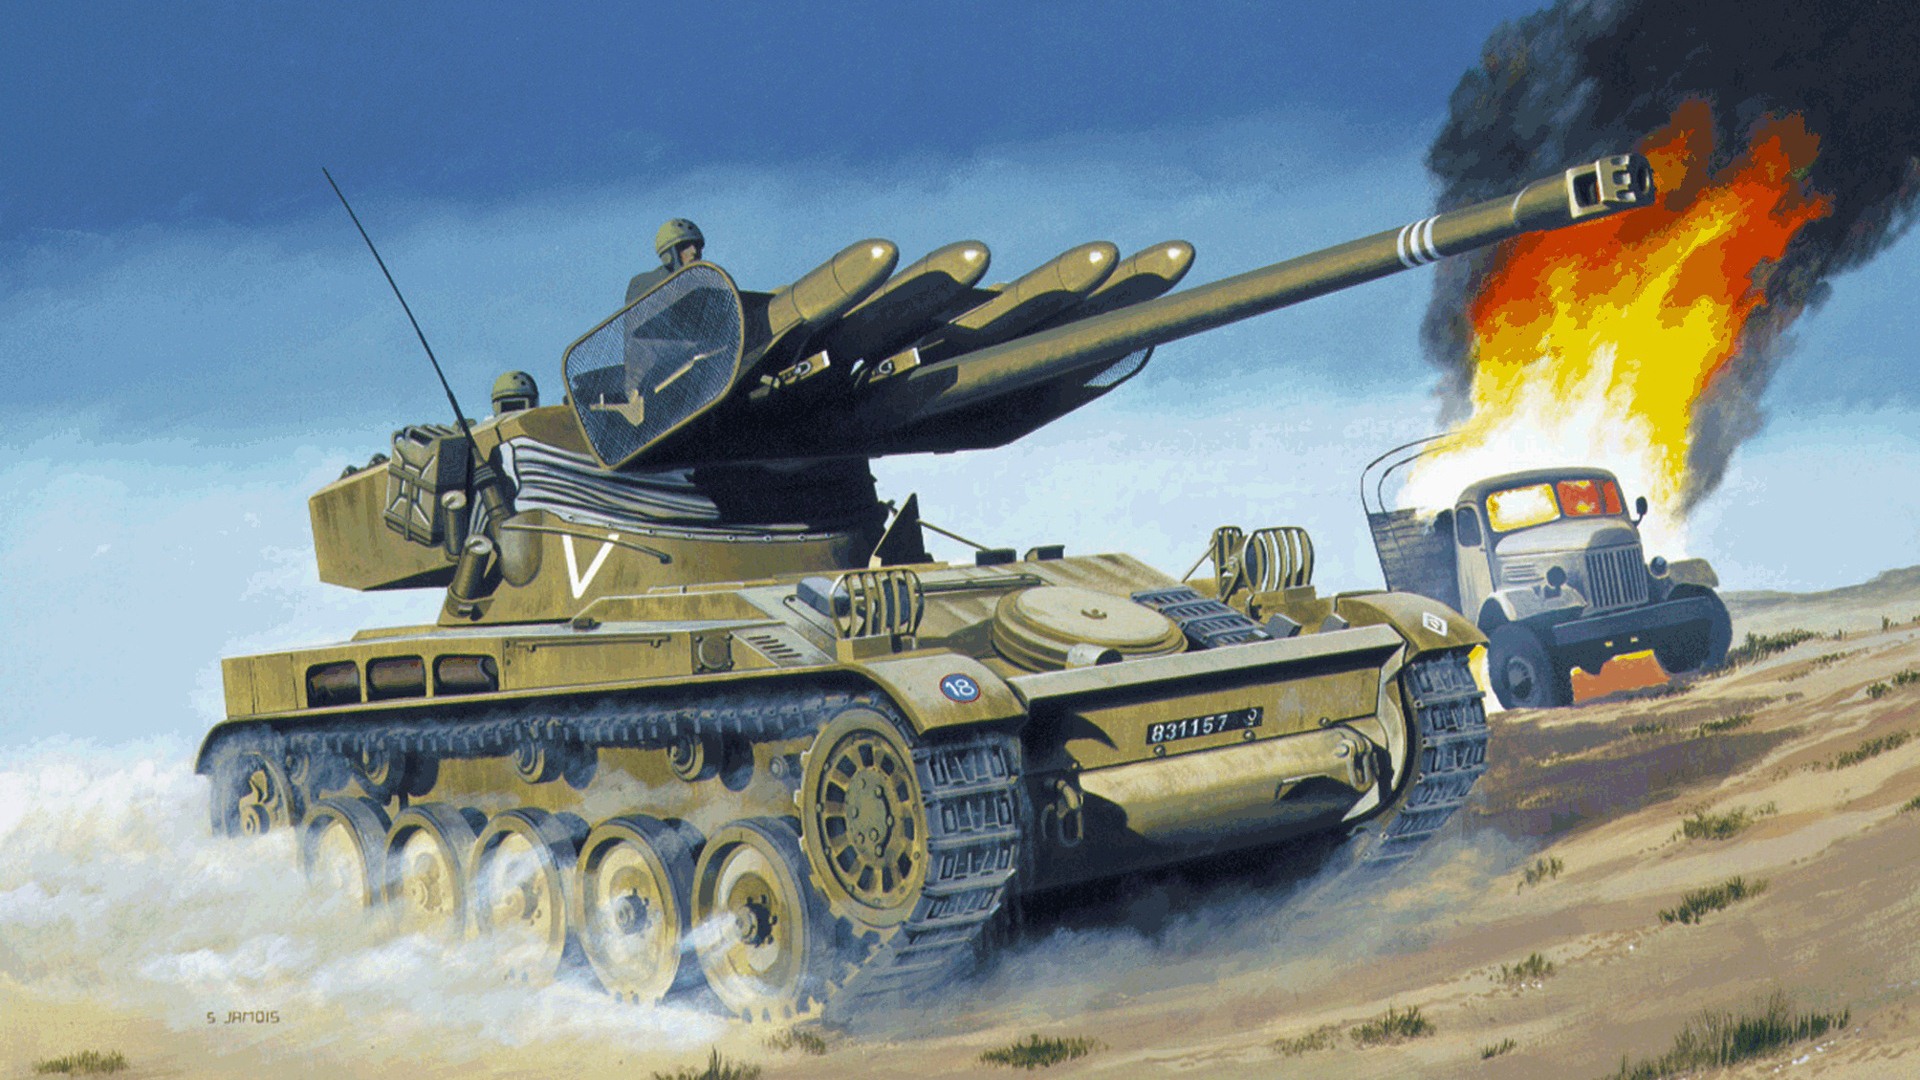 Military tanks, armored HD painting wallpapers #5 - 1920x1080